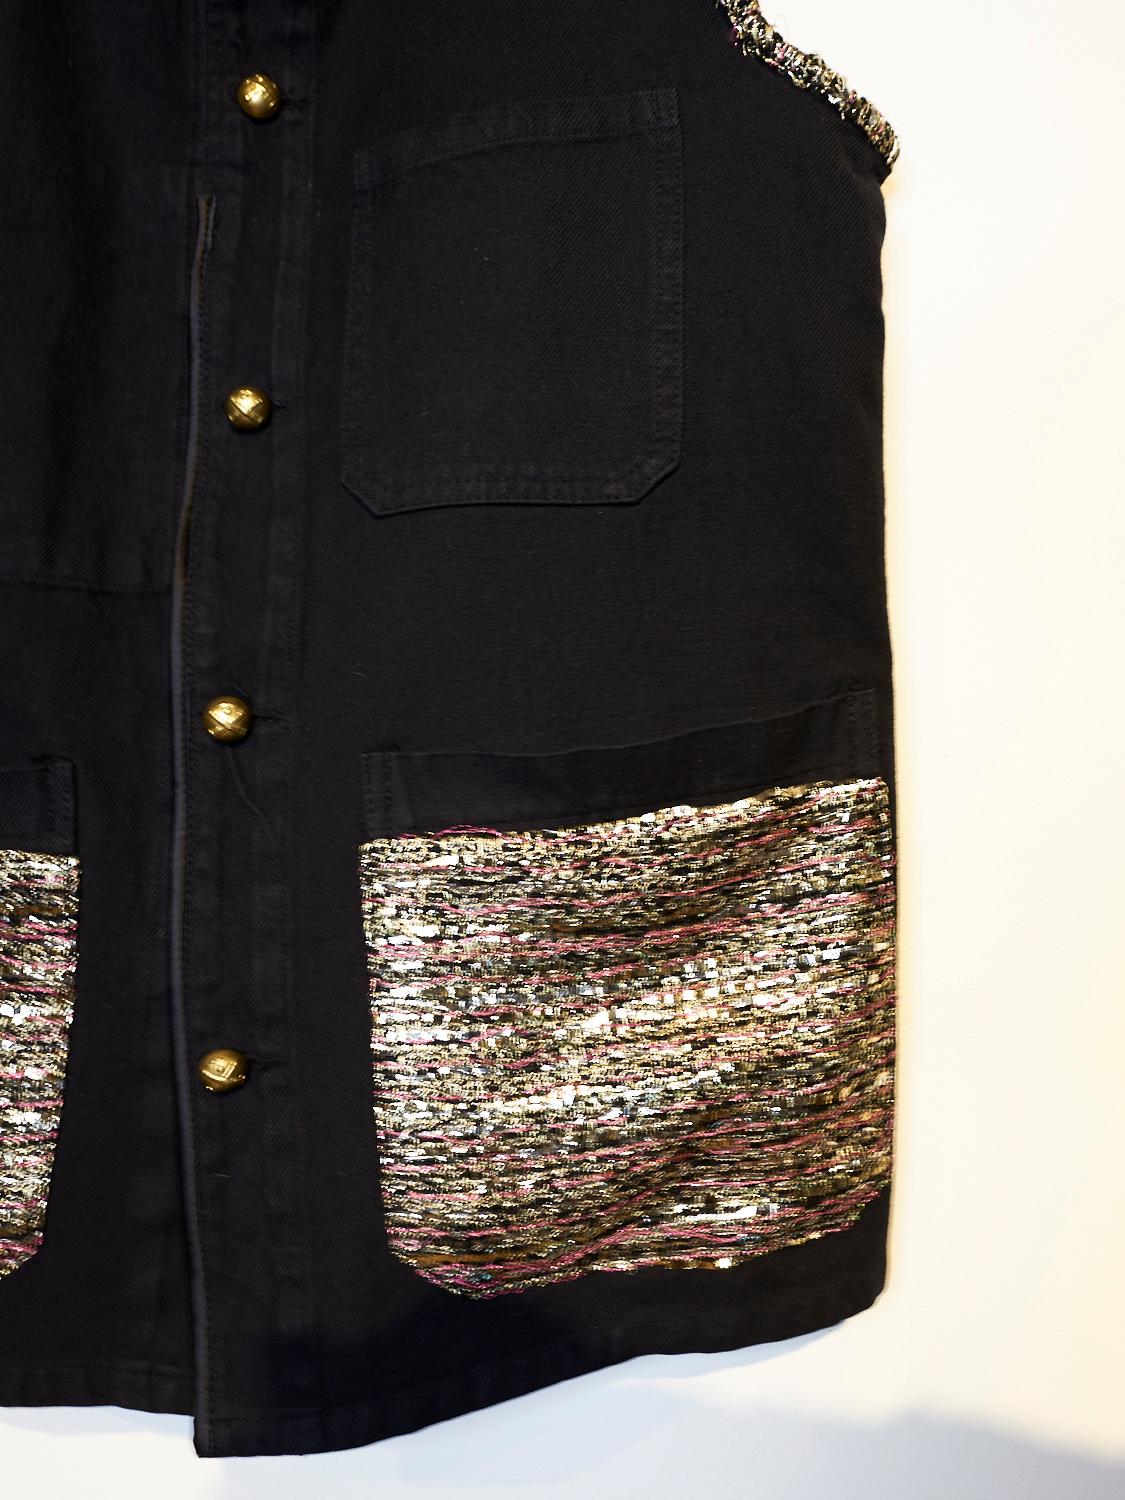 Embellished Sleeveless Jacket Vest Evening Black Gold Tweed Pockets J Dauphin In New Condition In Los Angeles, CA